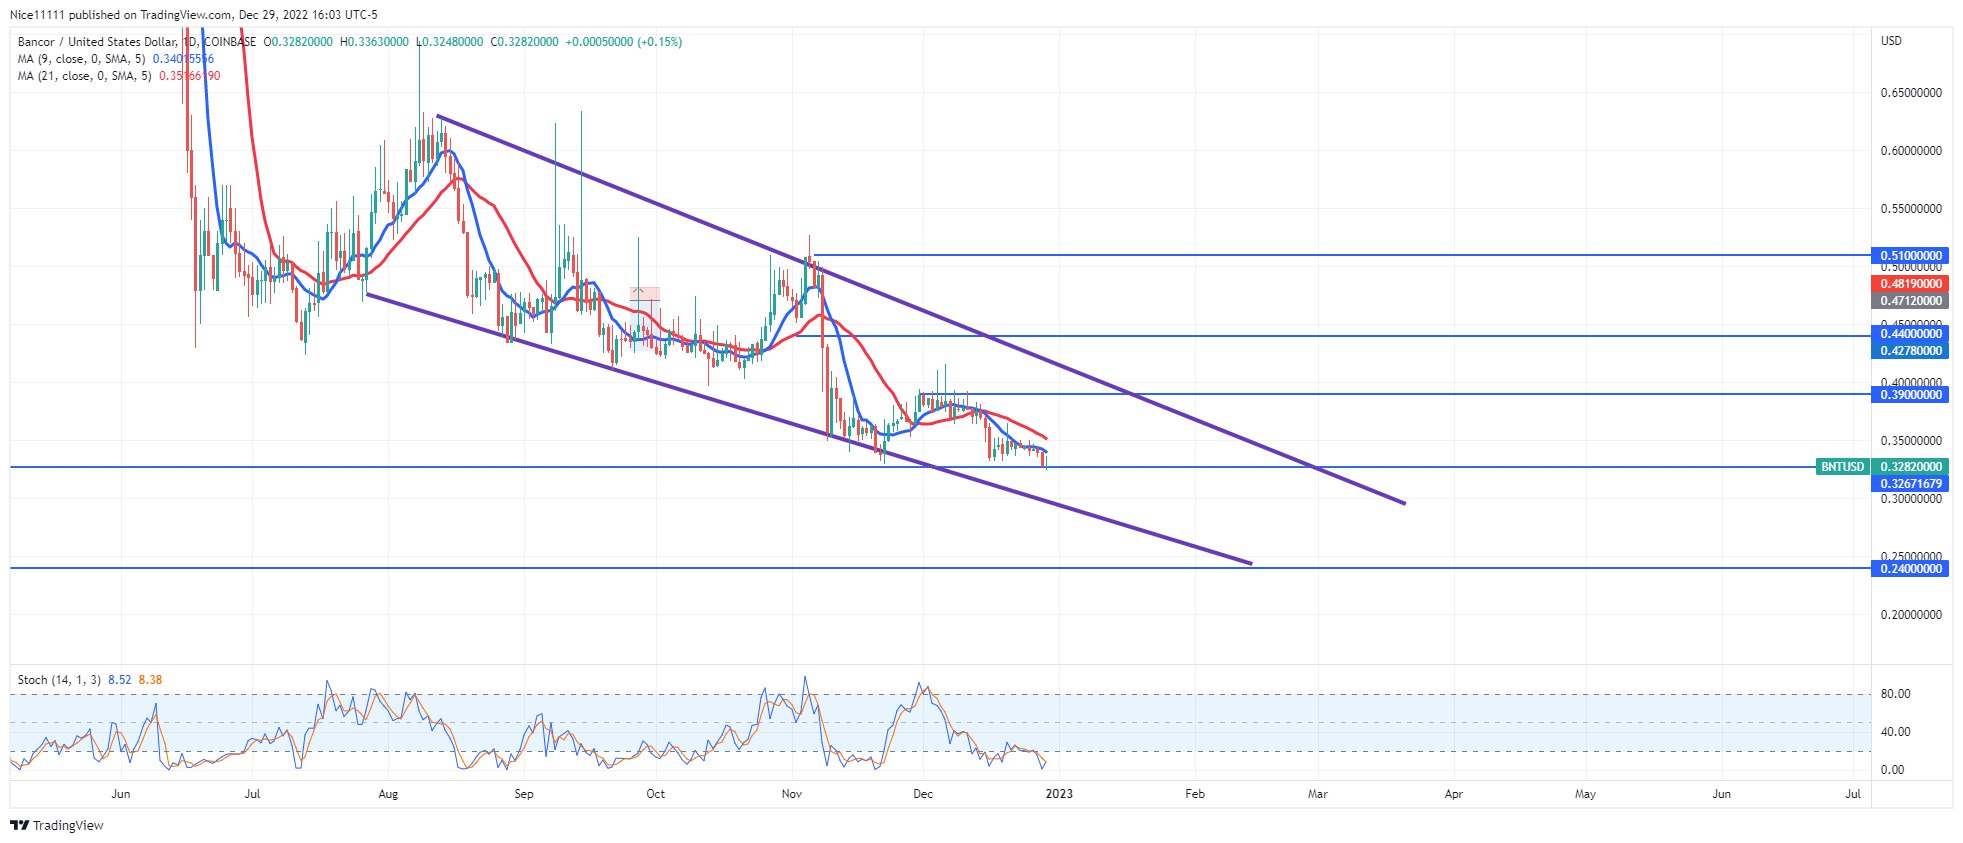 Bancor (BNTUSD) Continues to Crash in a Falling Wedge